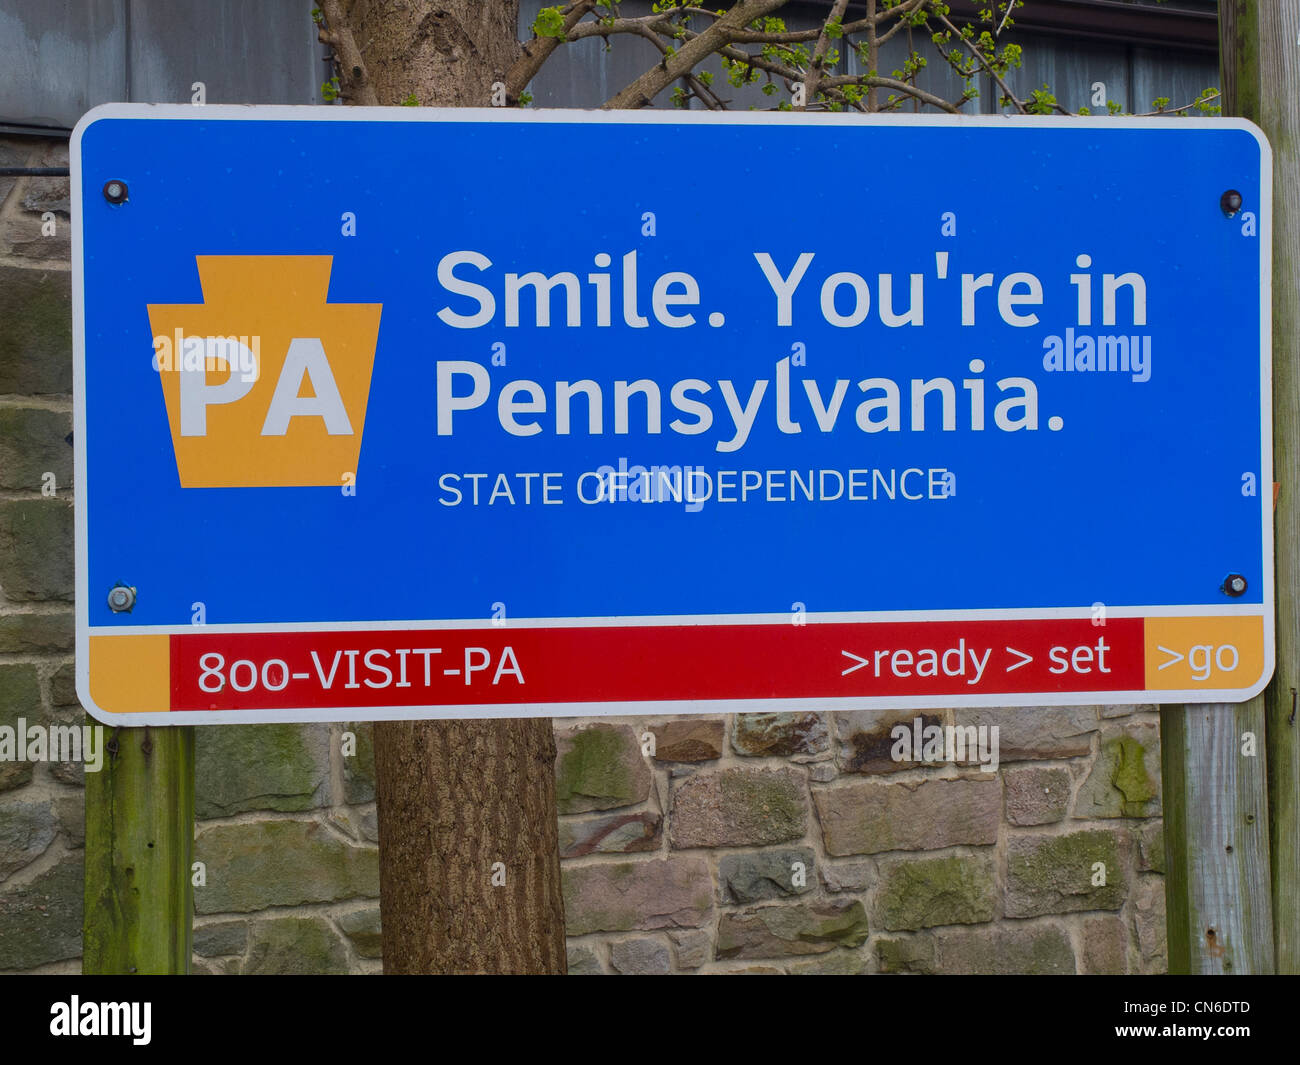 Smile you're in Pennsylvania welcome sign Stock Photo